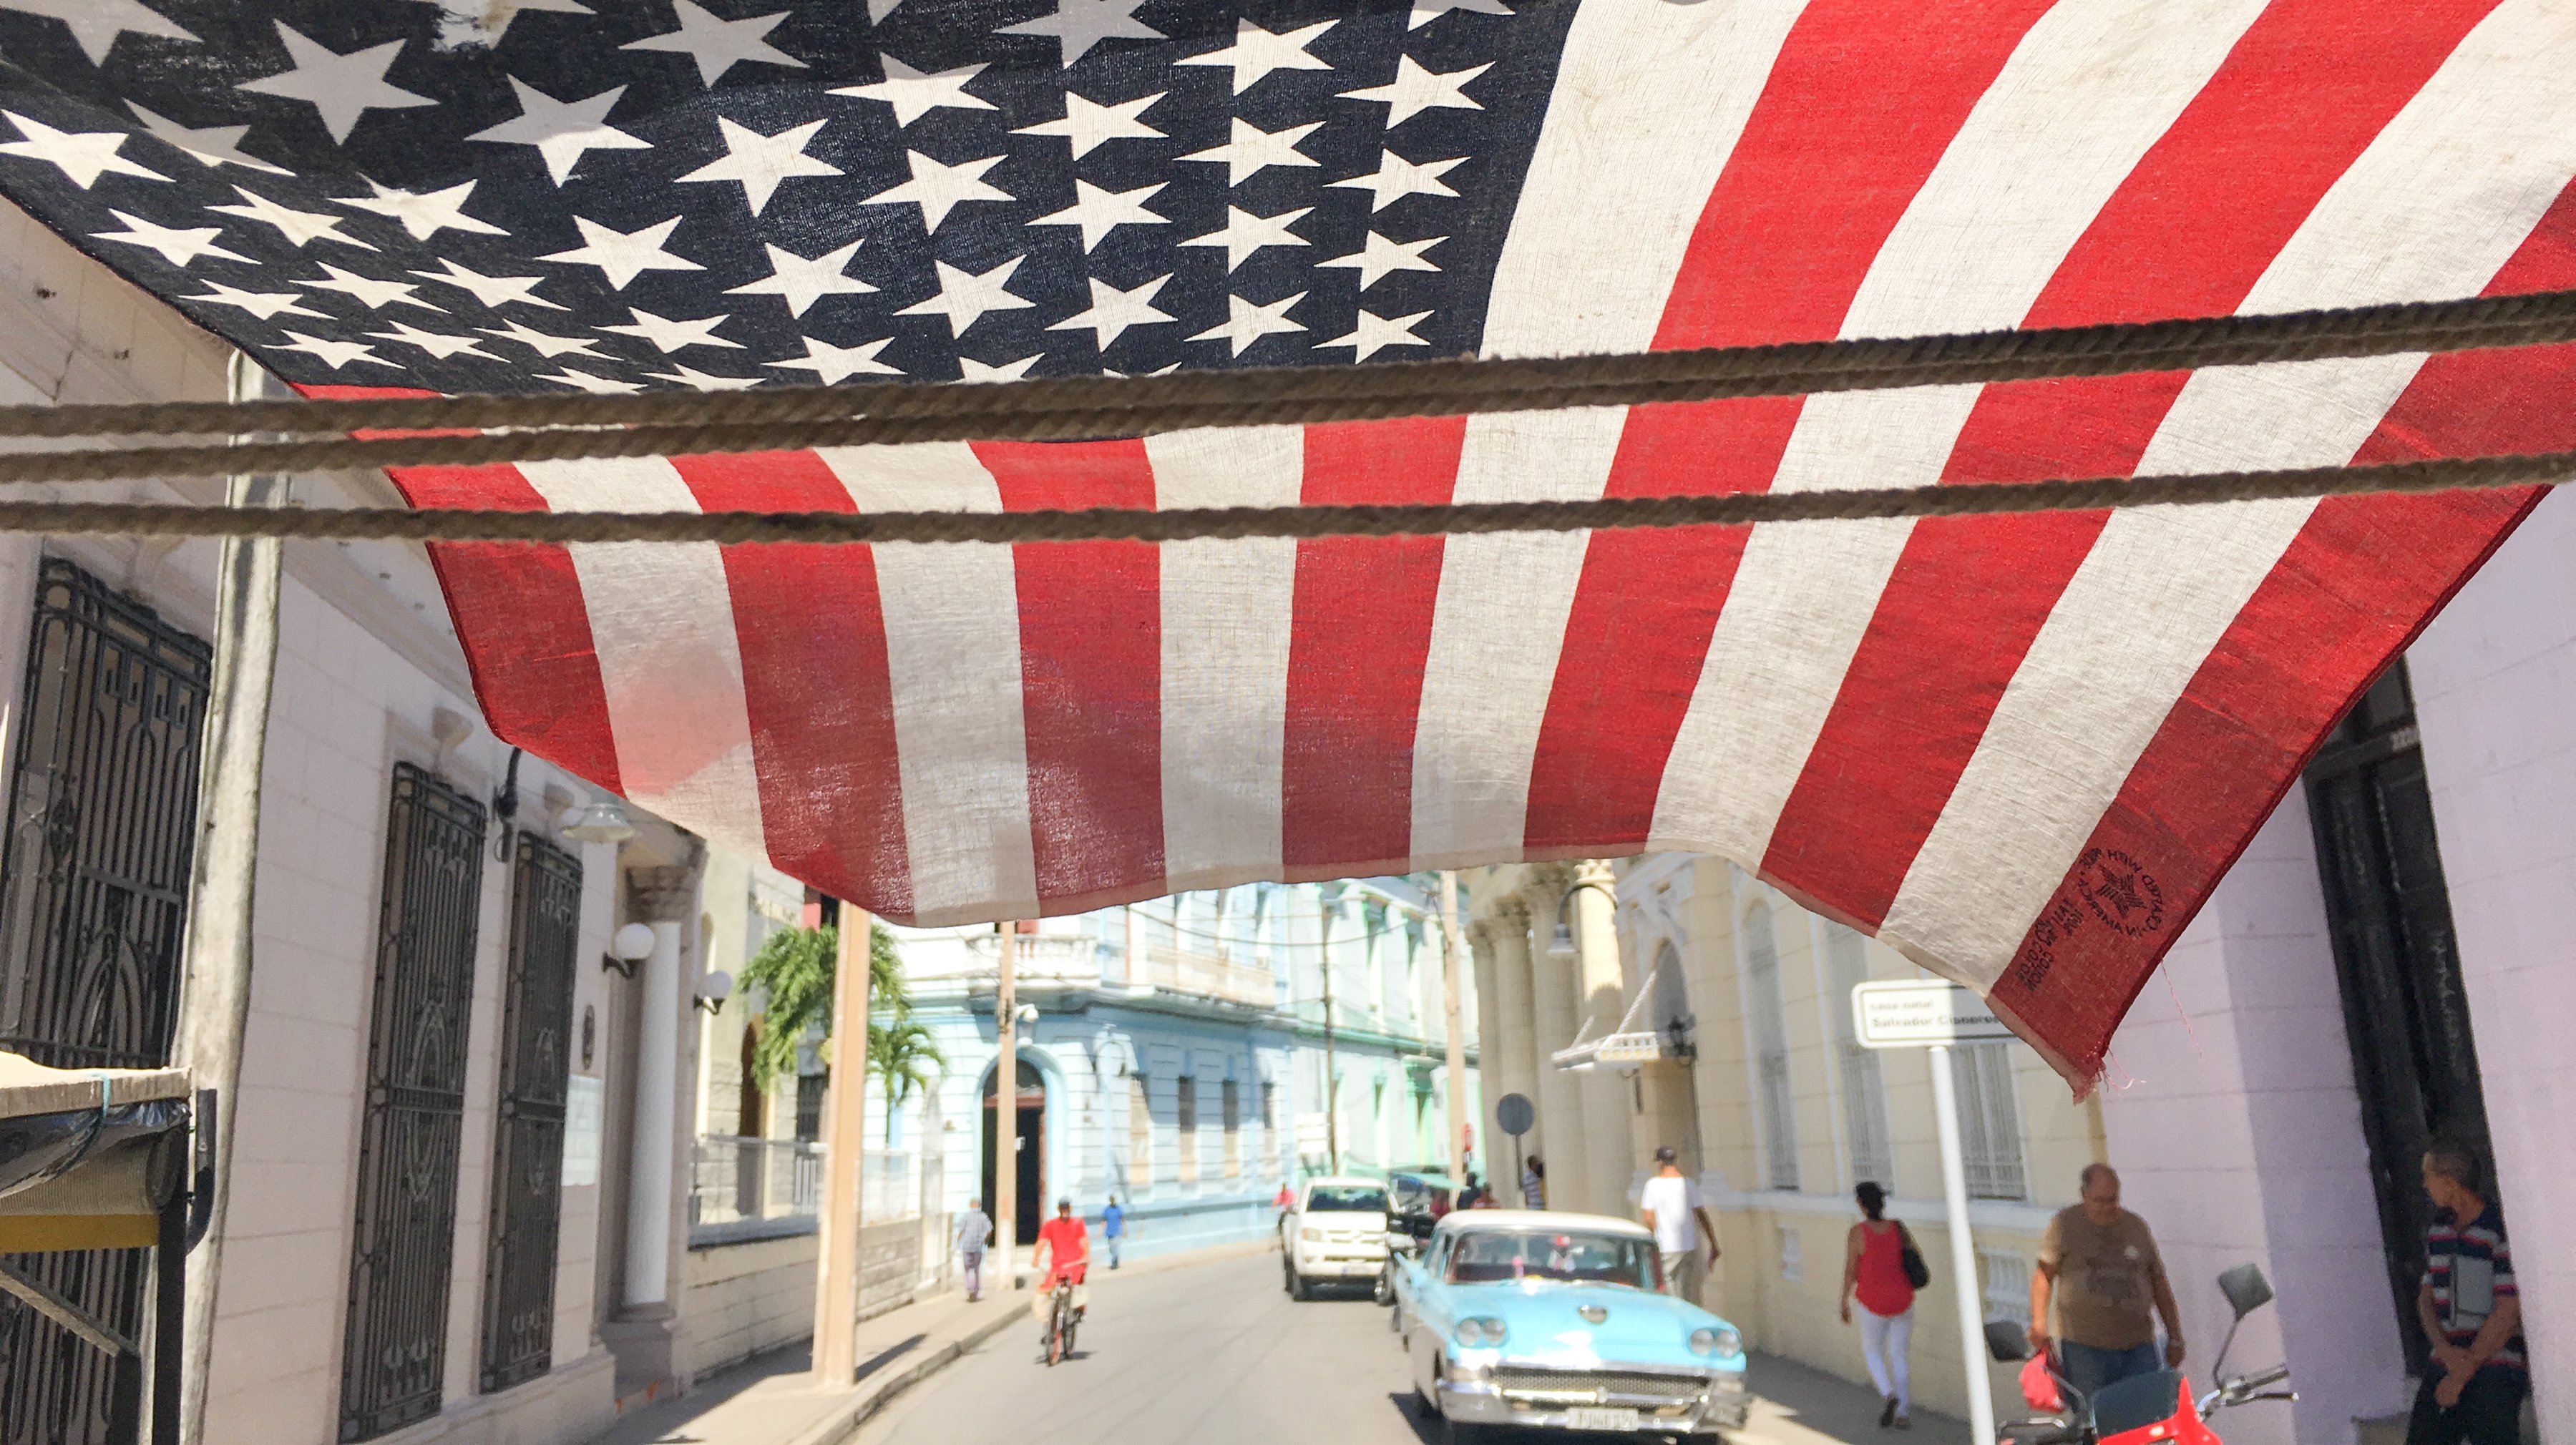 U.S.A or United States flag freely waving in Cuban private